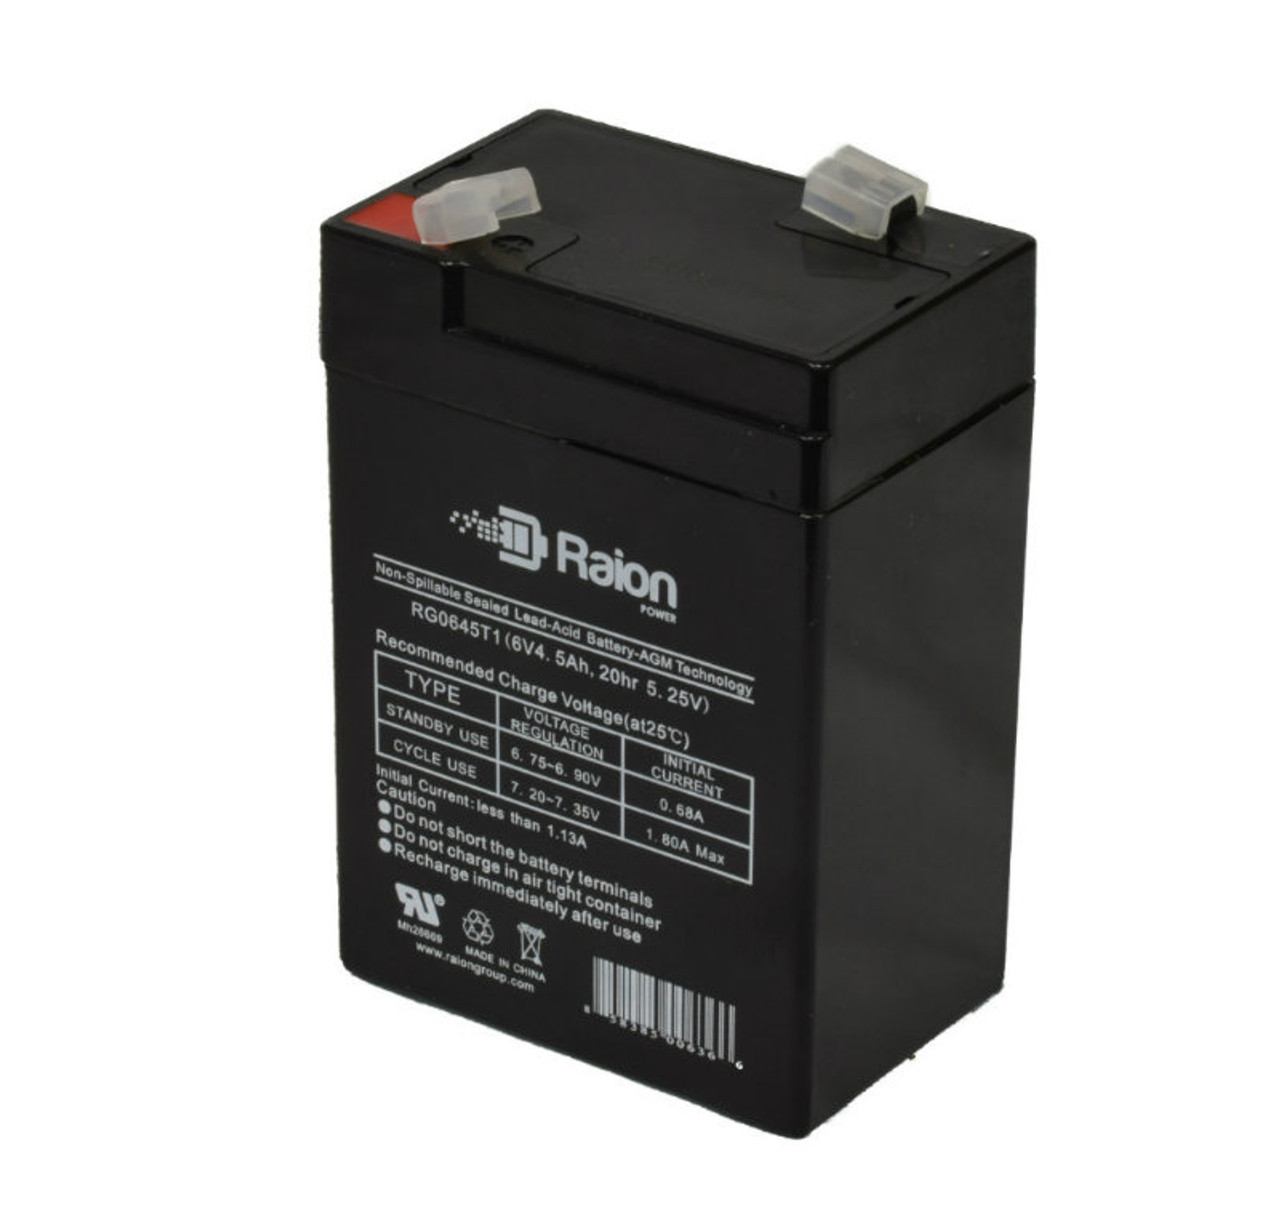 Raion Power RG0645T1 6V 4.5Ah Replacement Battery Cartridge for Lithonia FAS